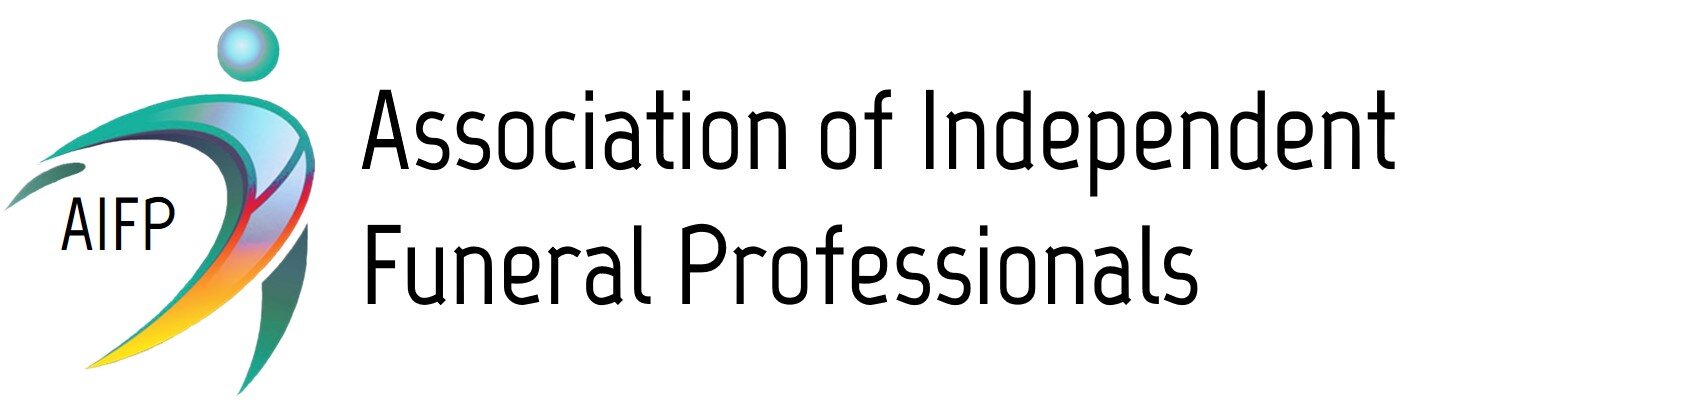 The Association of Independent Funeral Professionals